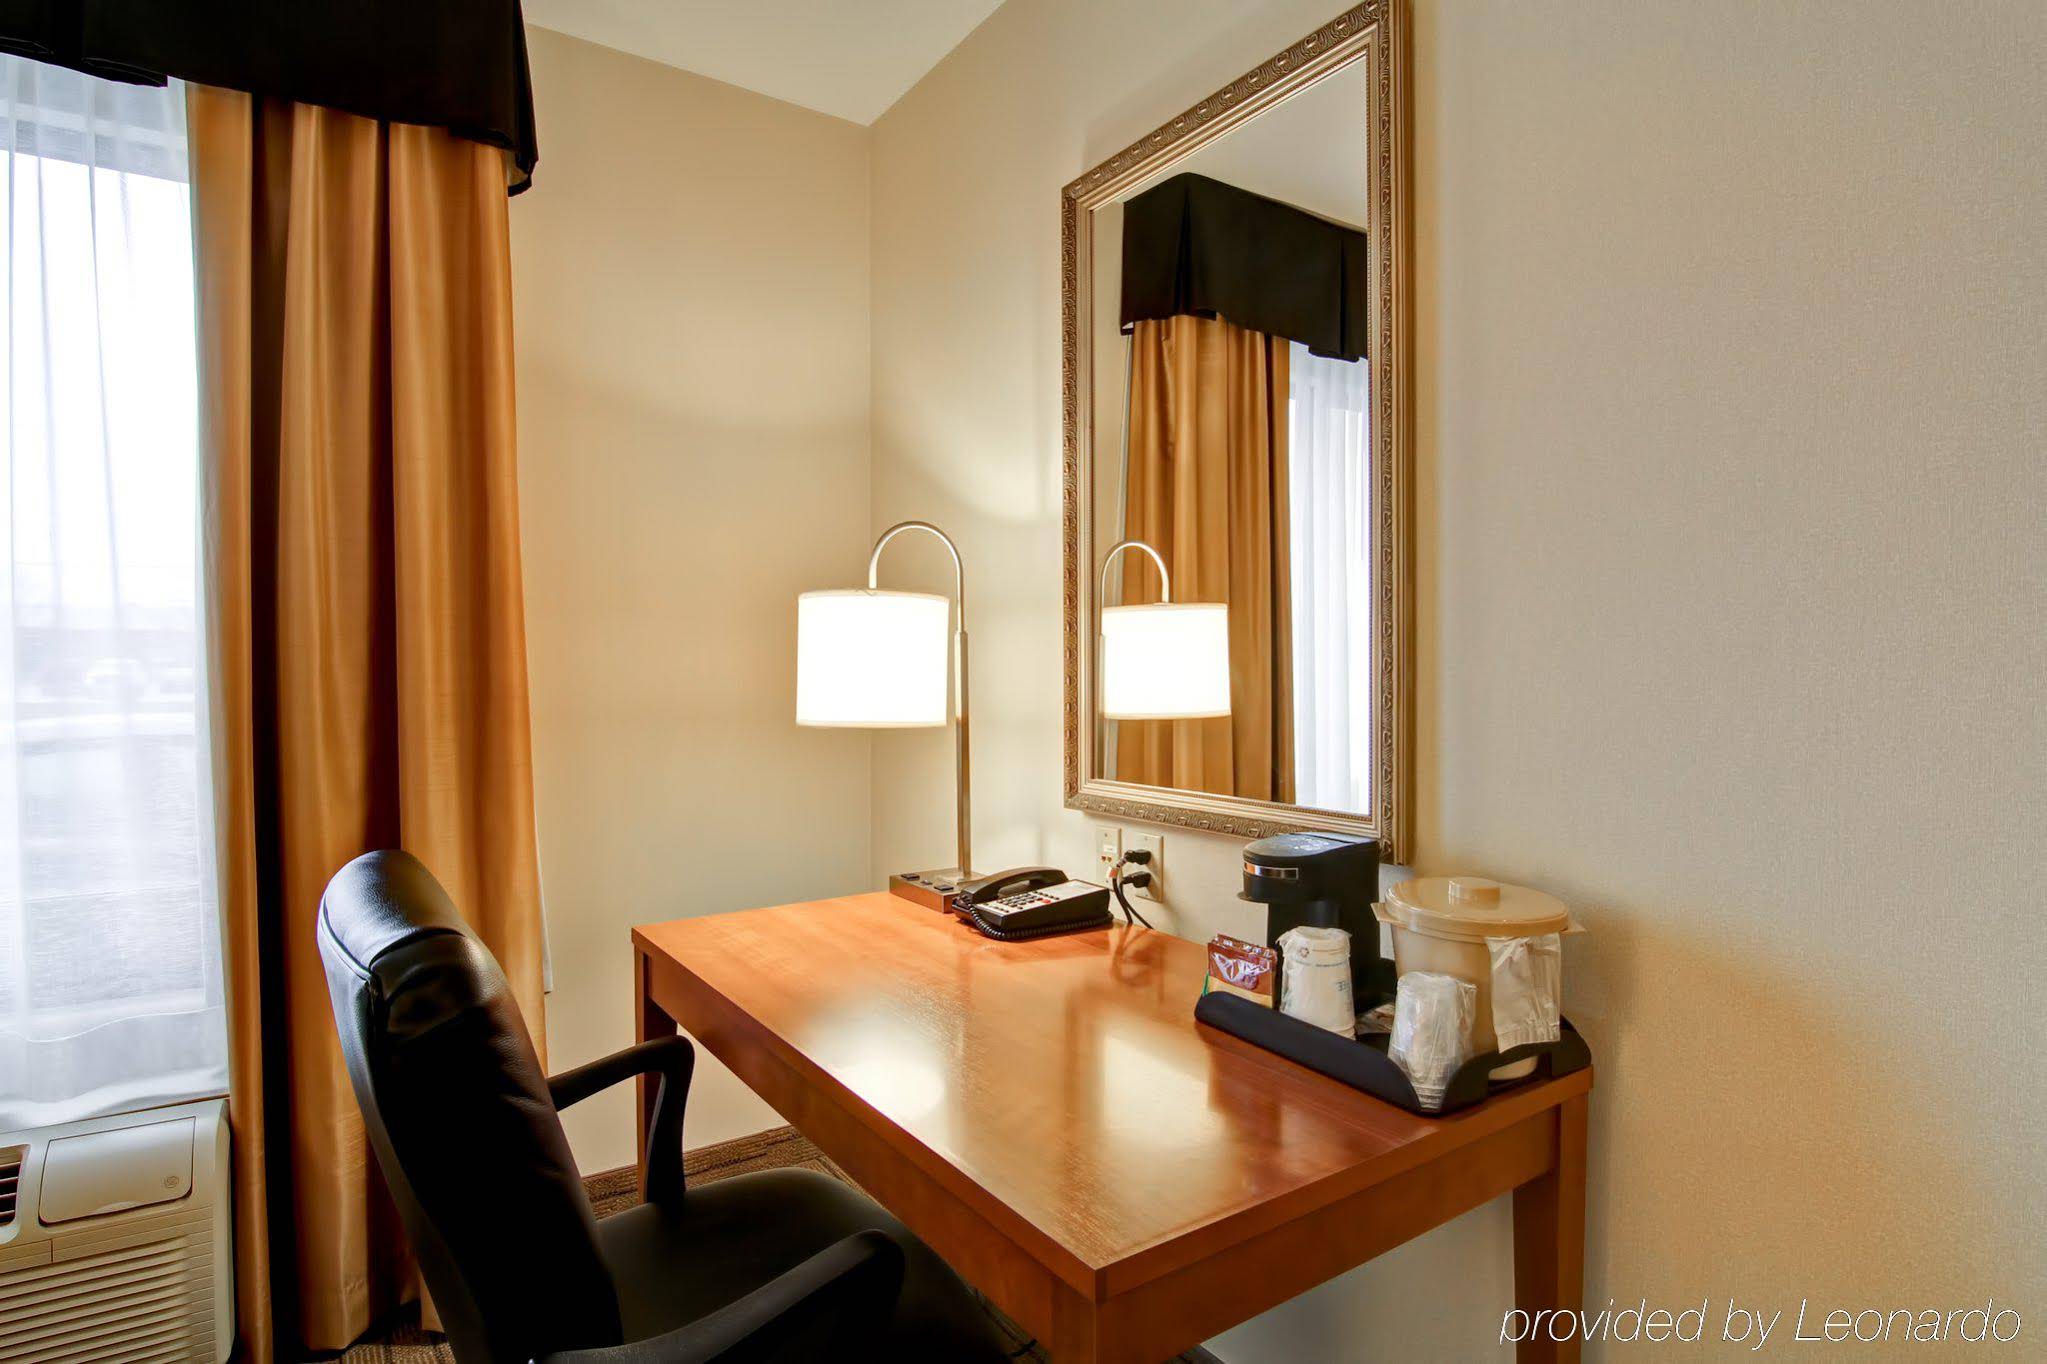 Holiday Inn Express & Suites Guelph